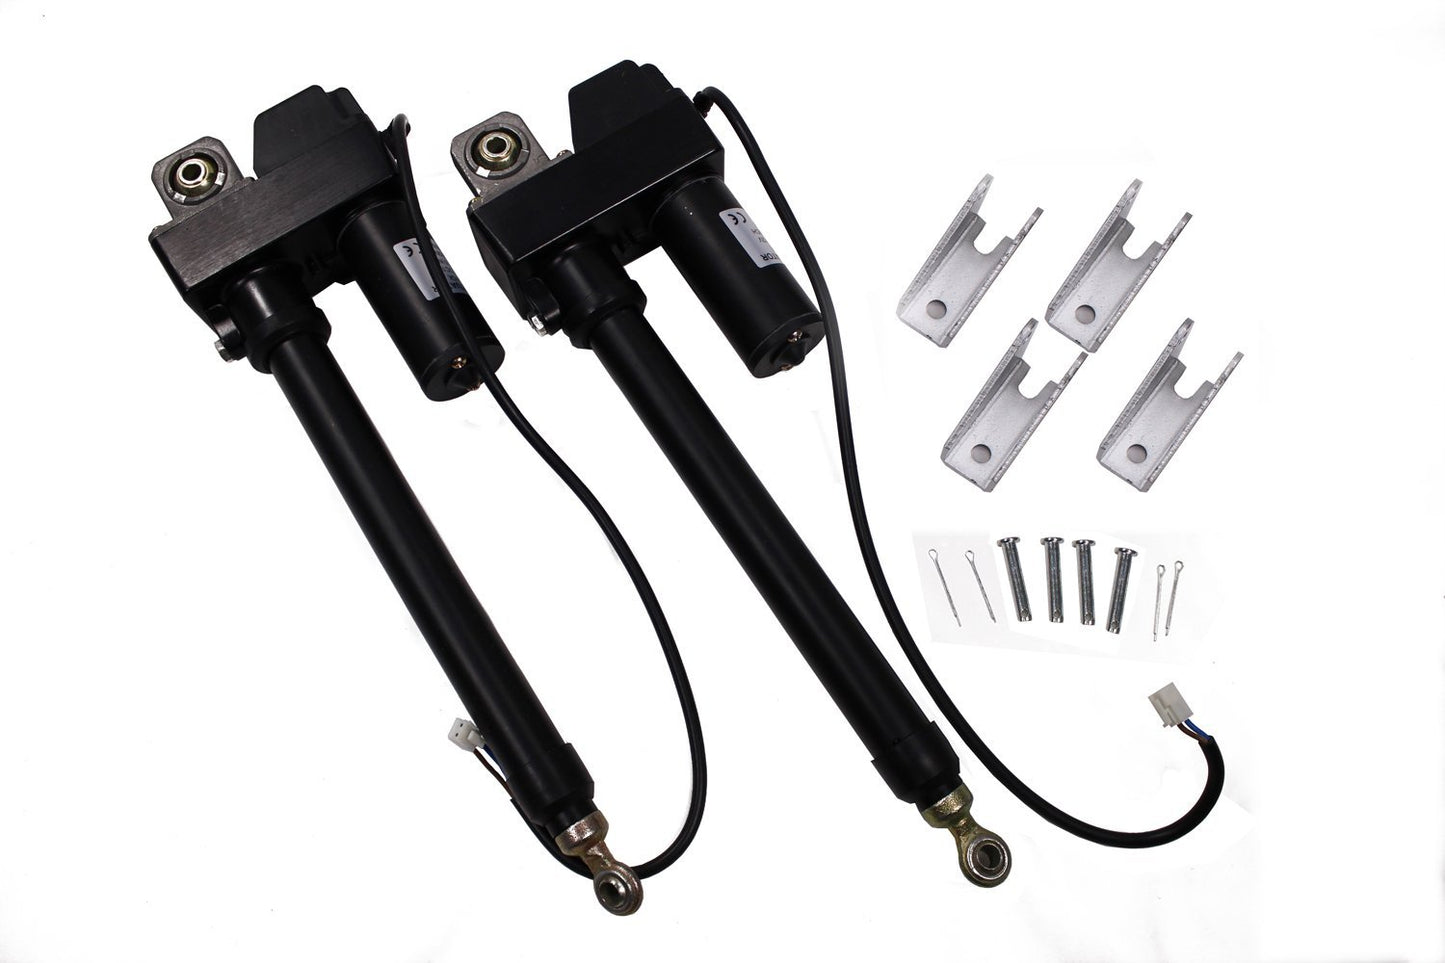 2 pcs High Performance Linear Actuator 6 Inch Stroke 225lb Max Lift Output 12-Volt DC with Mounting Brackets